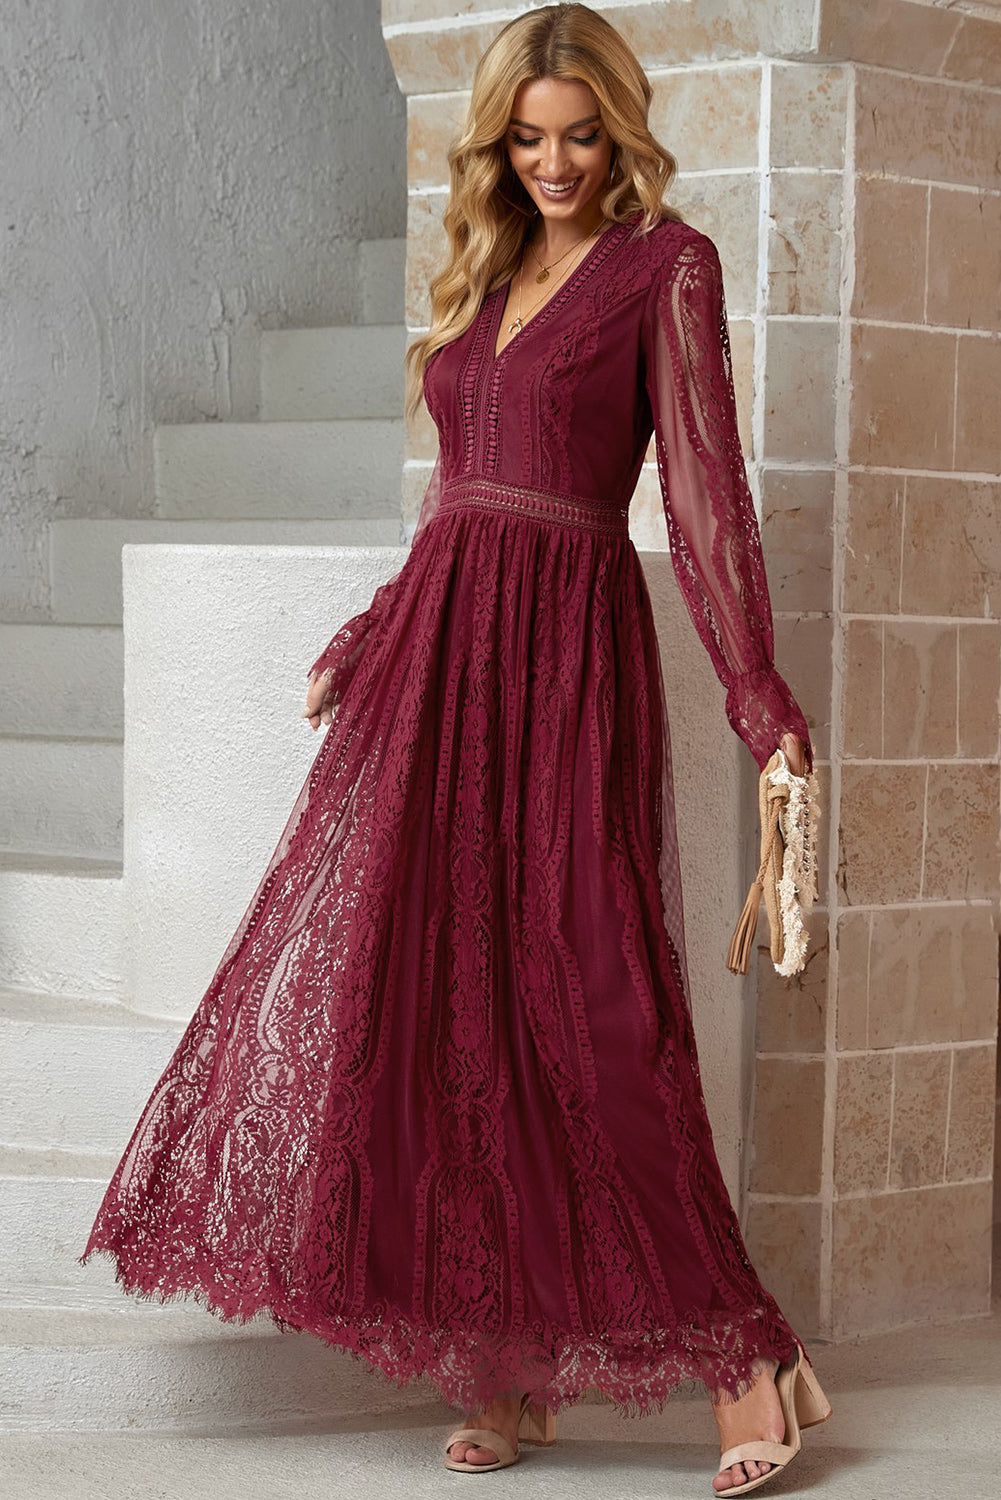 Dreams 70's Boho  Lace Maxi Dress in Wine or Wedding White